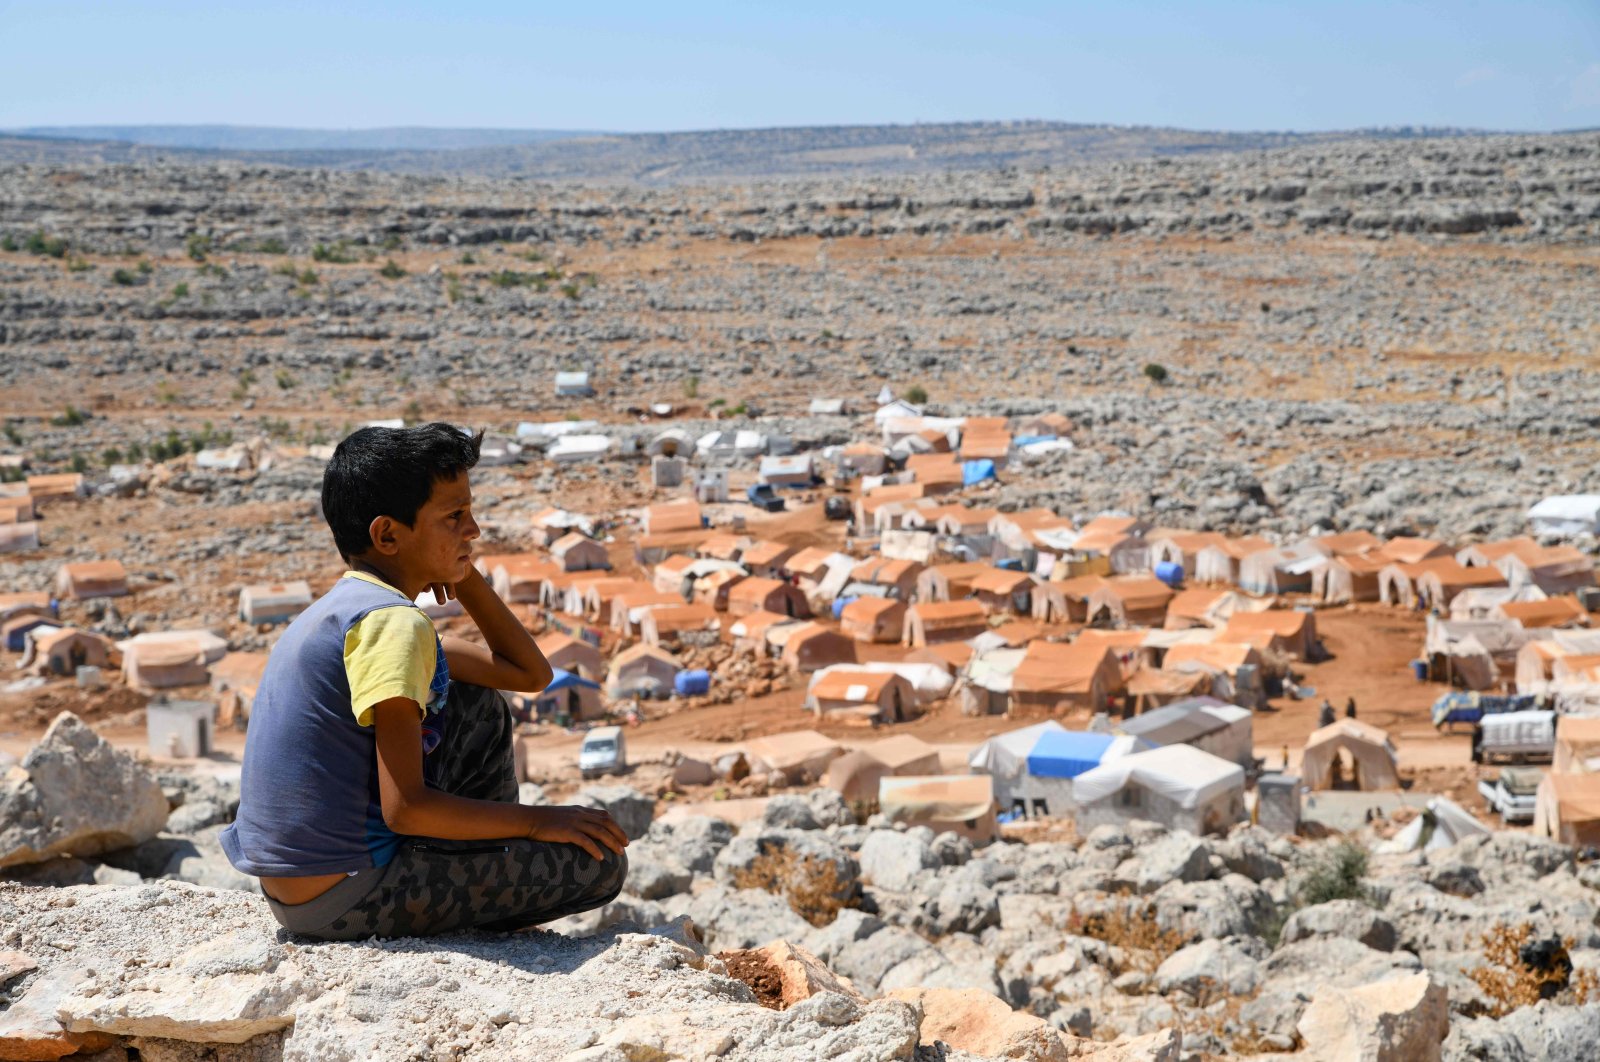 A young Syrian boy, who was displaced from the town of Khan Sheikhoun, gazes from a small hilltop at the makeshift camp where he currently lives, in the northern countryside of the Idlib province near the Turkish border, Syria, Sept. 8, 2019. (AFP File Photo)